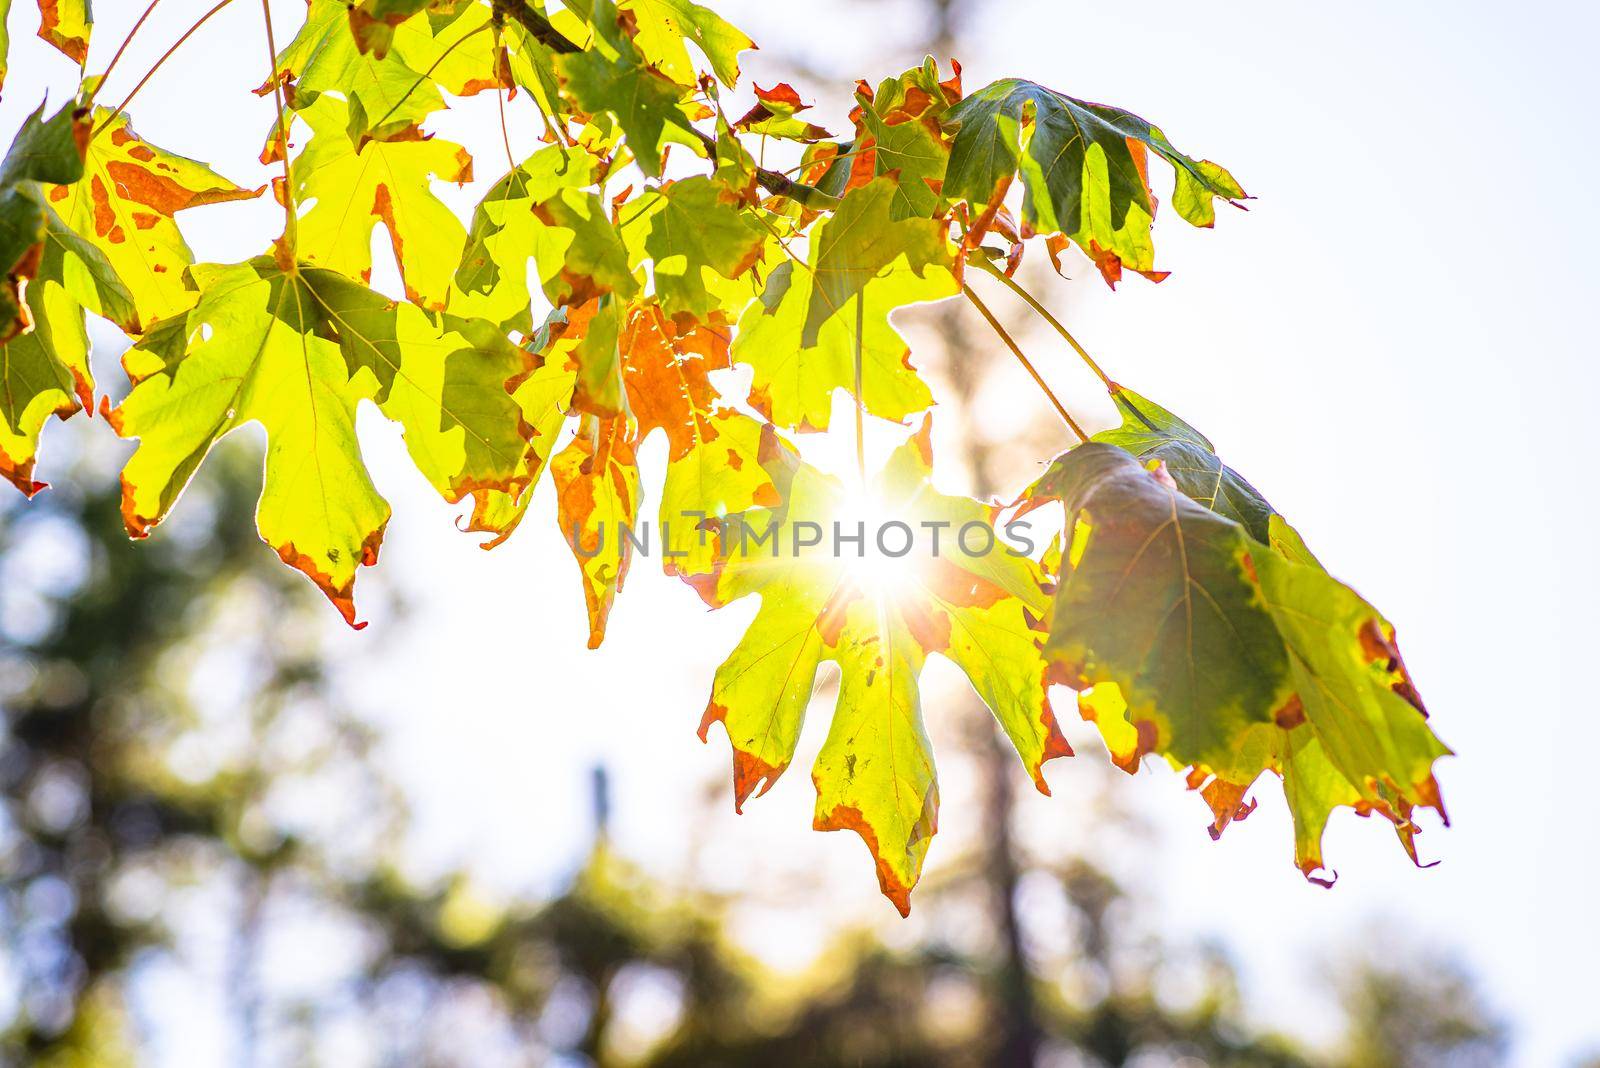 Yellowing and withering leaves on a maple tree, fall season concept by Pendleton